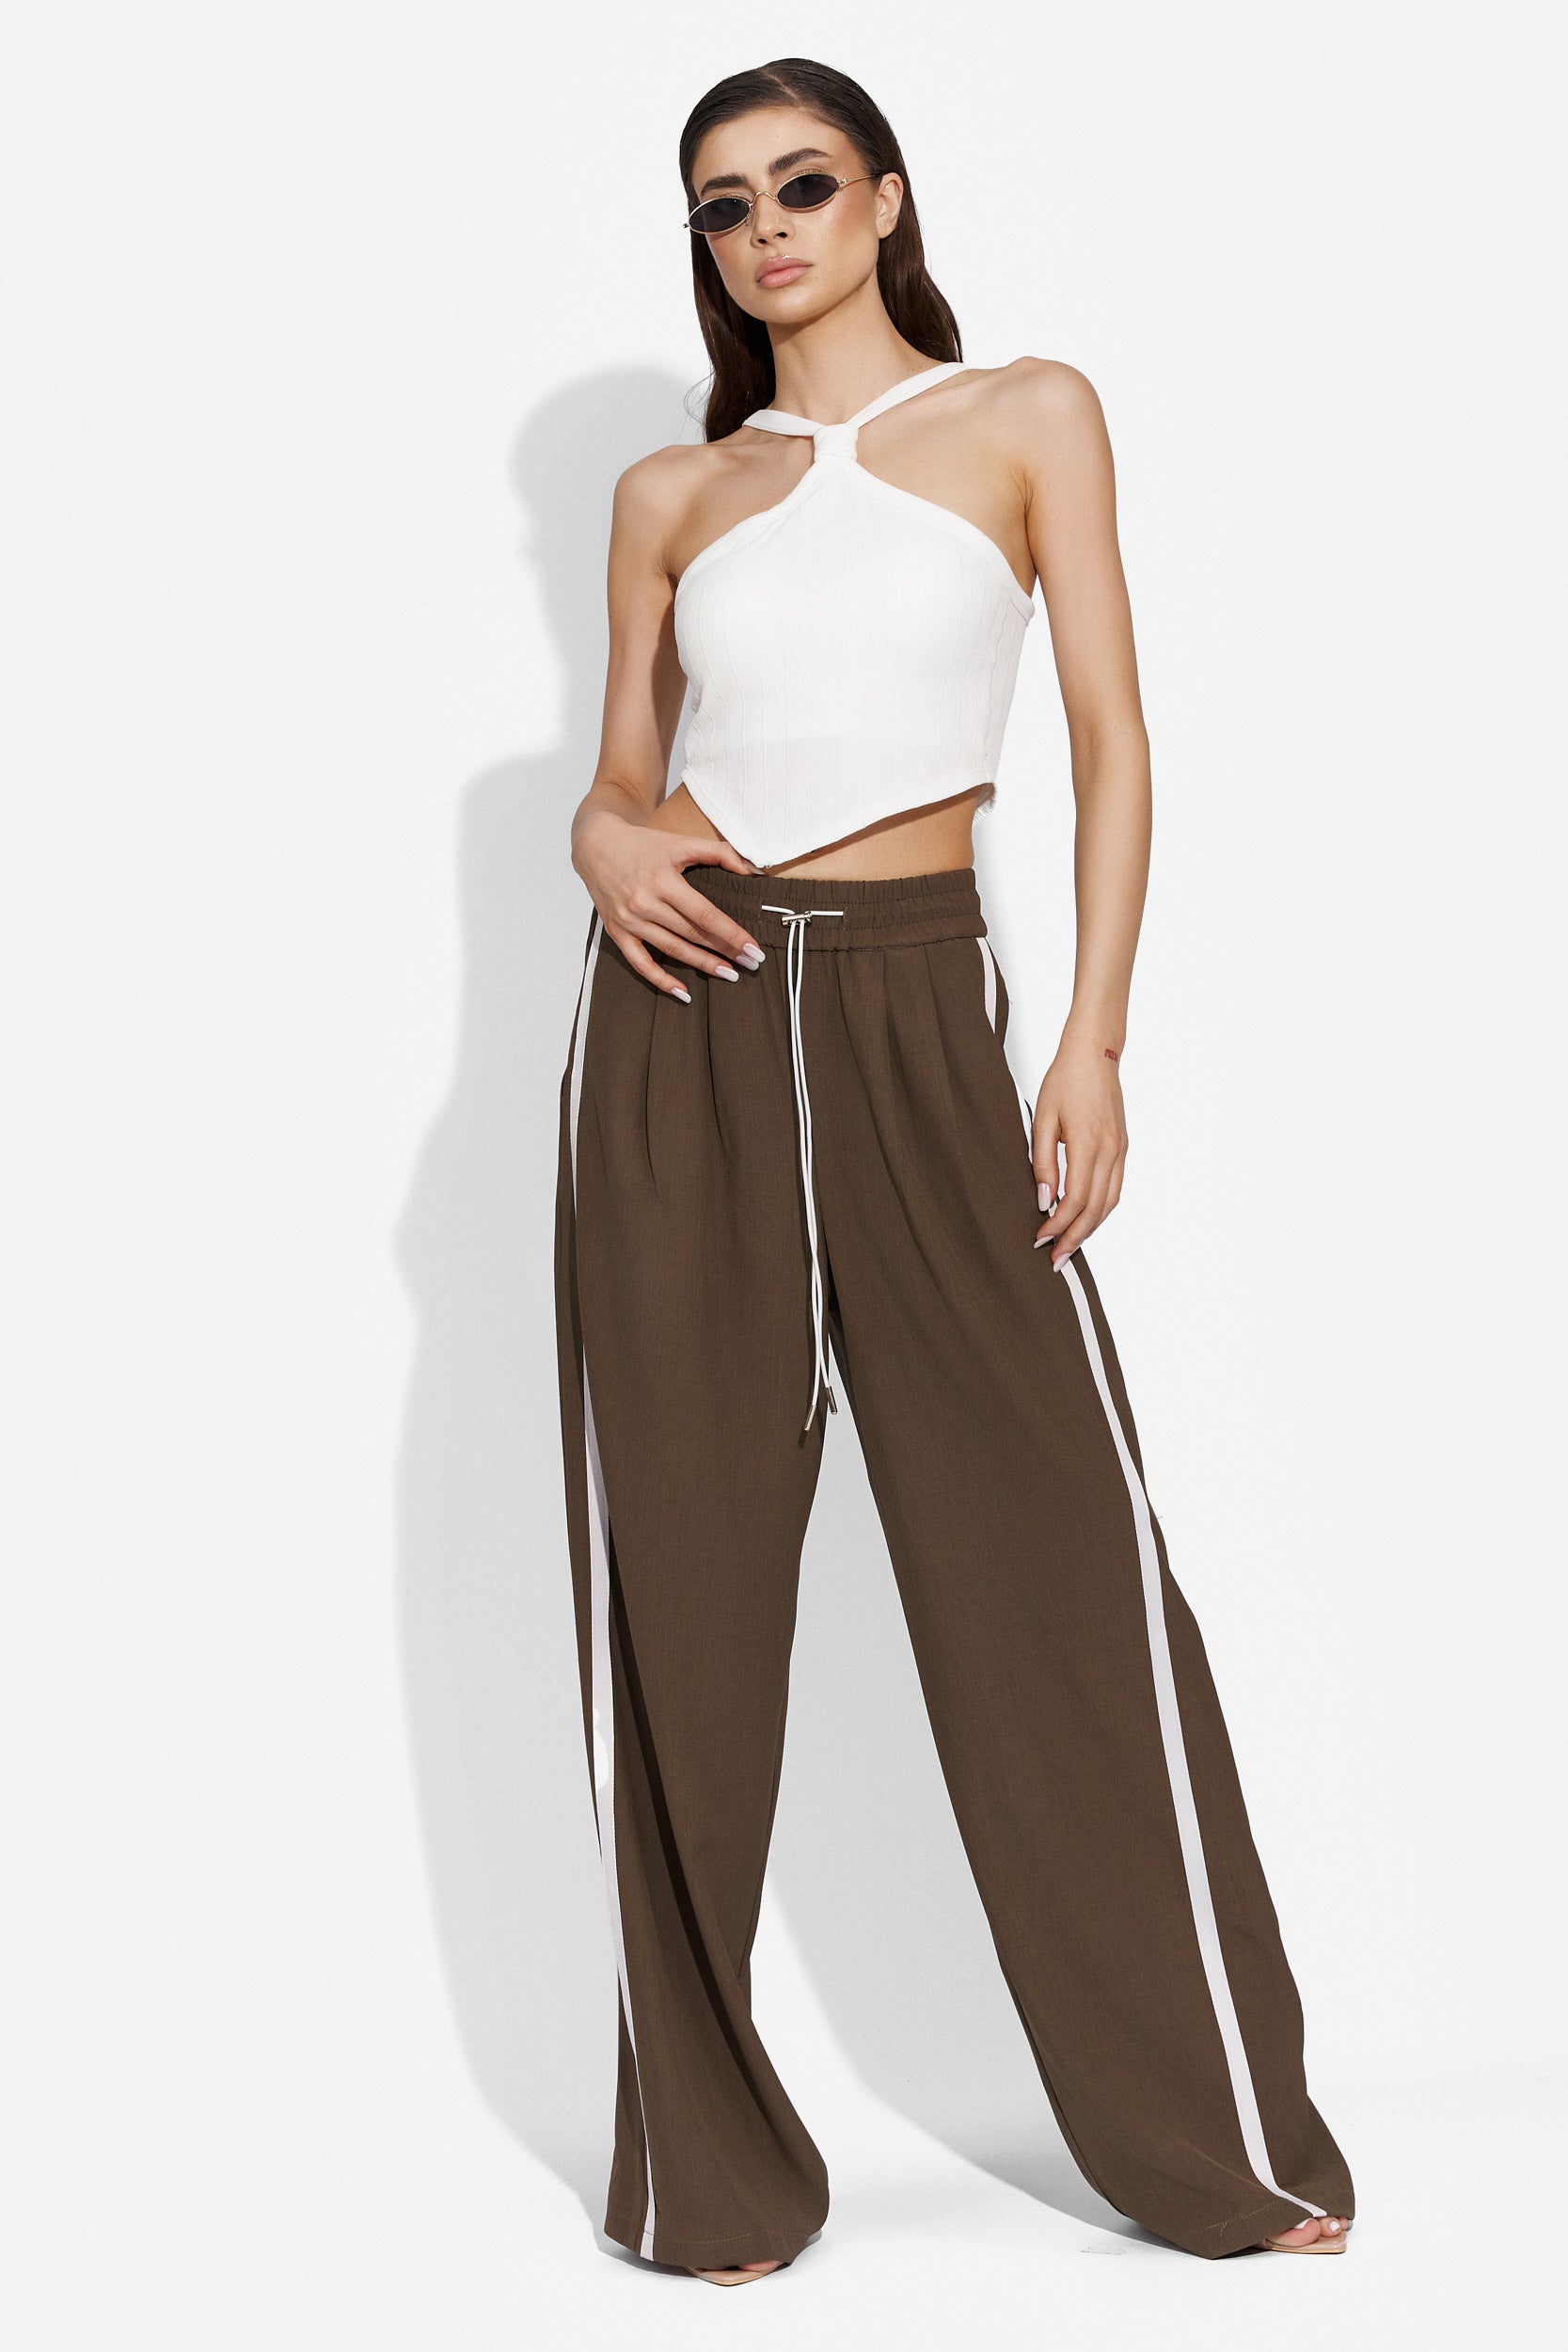 Casual brown ladies trousers Floreina Bogas